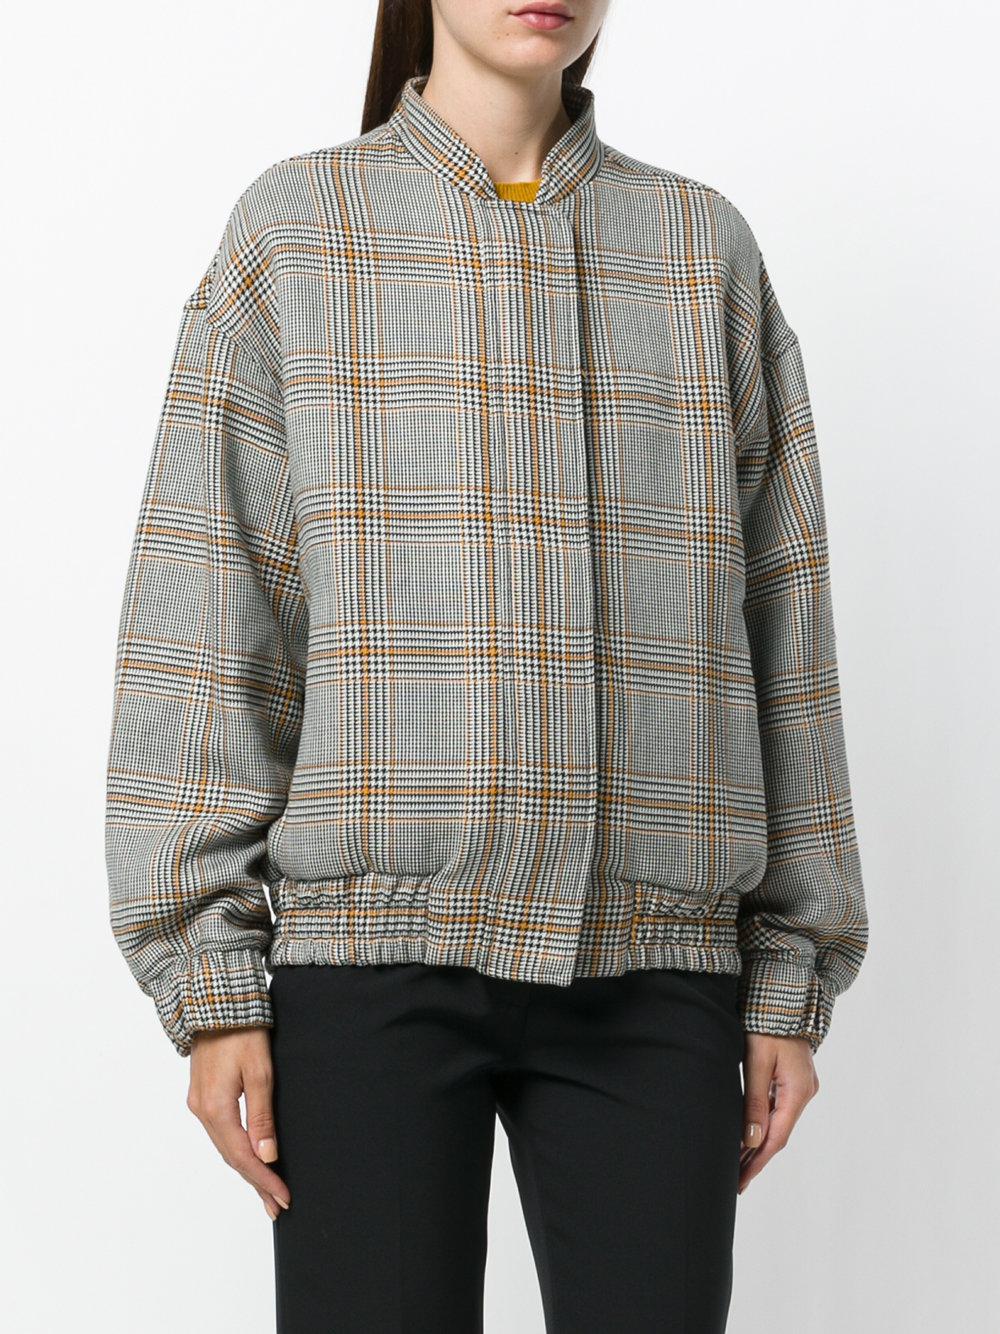 MSGM Wool Checked Bomber Jacket in Grey (Gray) - Lyst